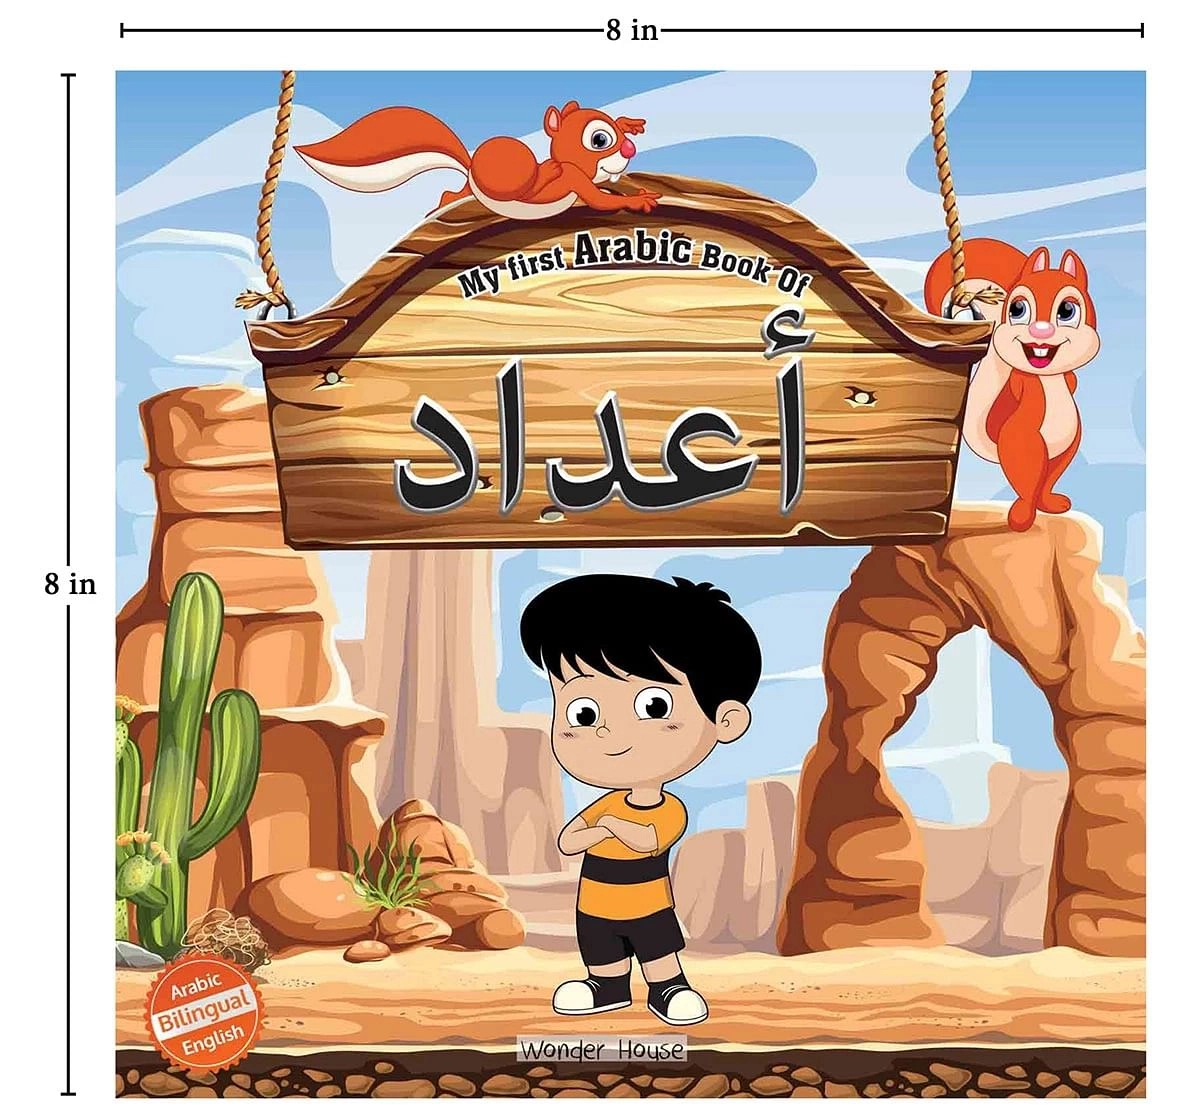 Wonder House Books My First Arabic Book of Numbers Bilingual for kids 0M+, Multicolour